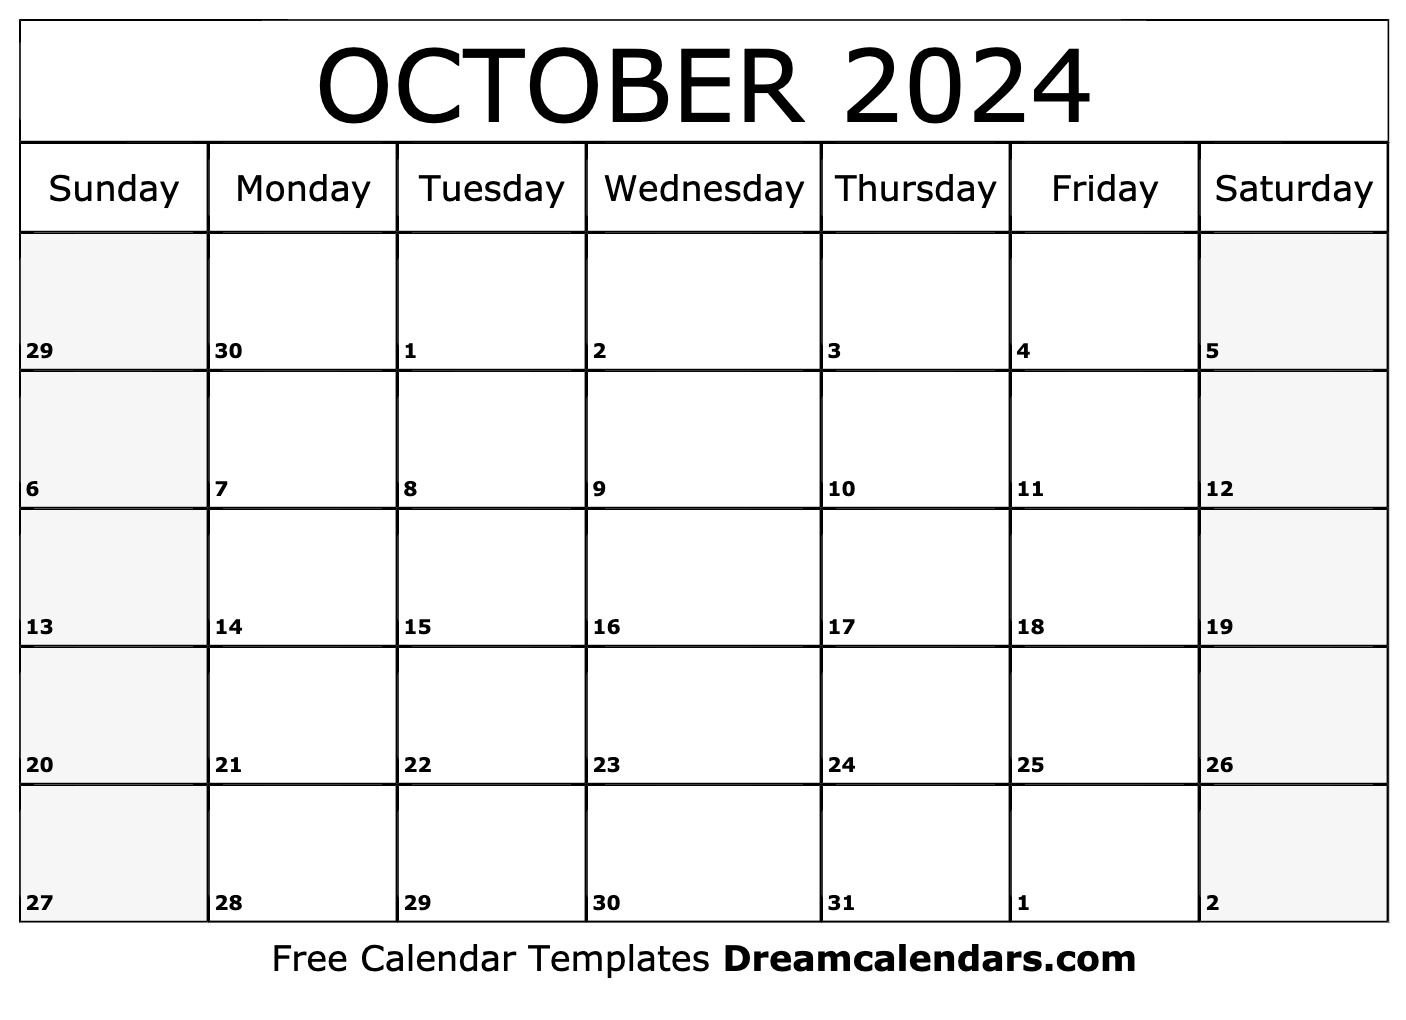 October 2024 Calendar | Free Blank Printable With Holidays for 2024 Calendar Printable October